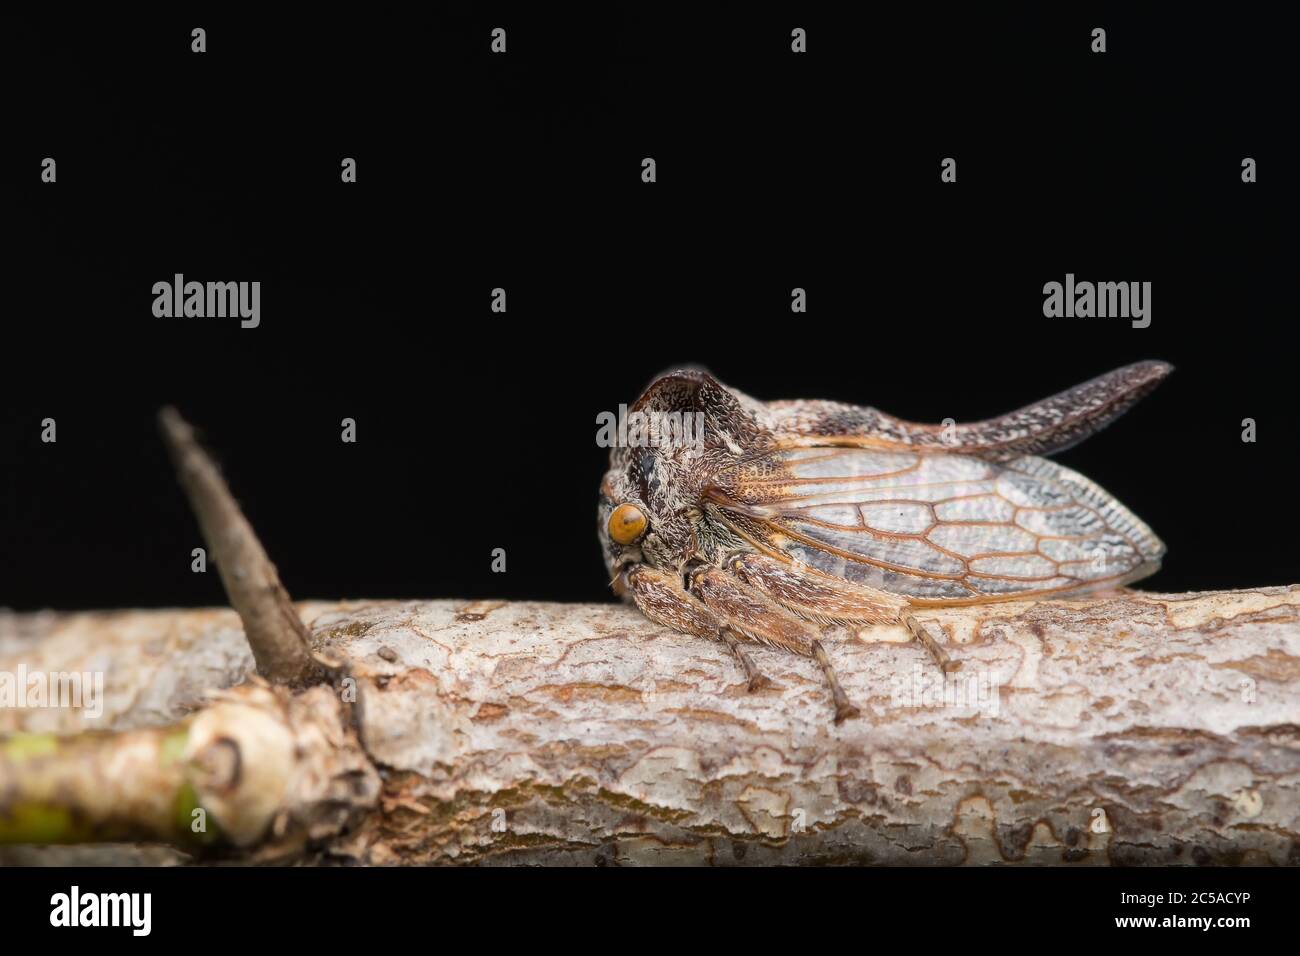 A Plant-hopper resting on dried Acacia thorns against black background. Stock Photo